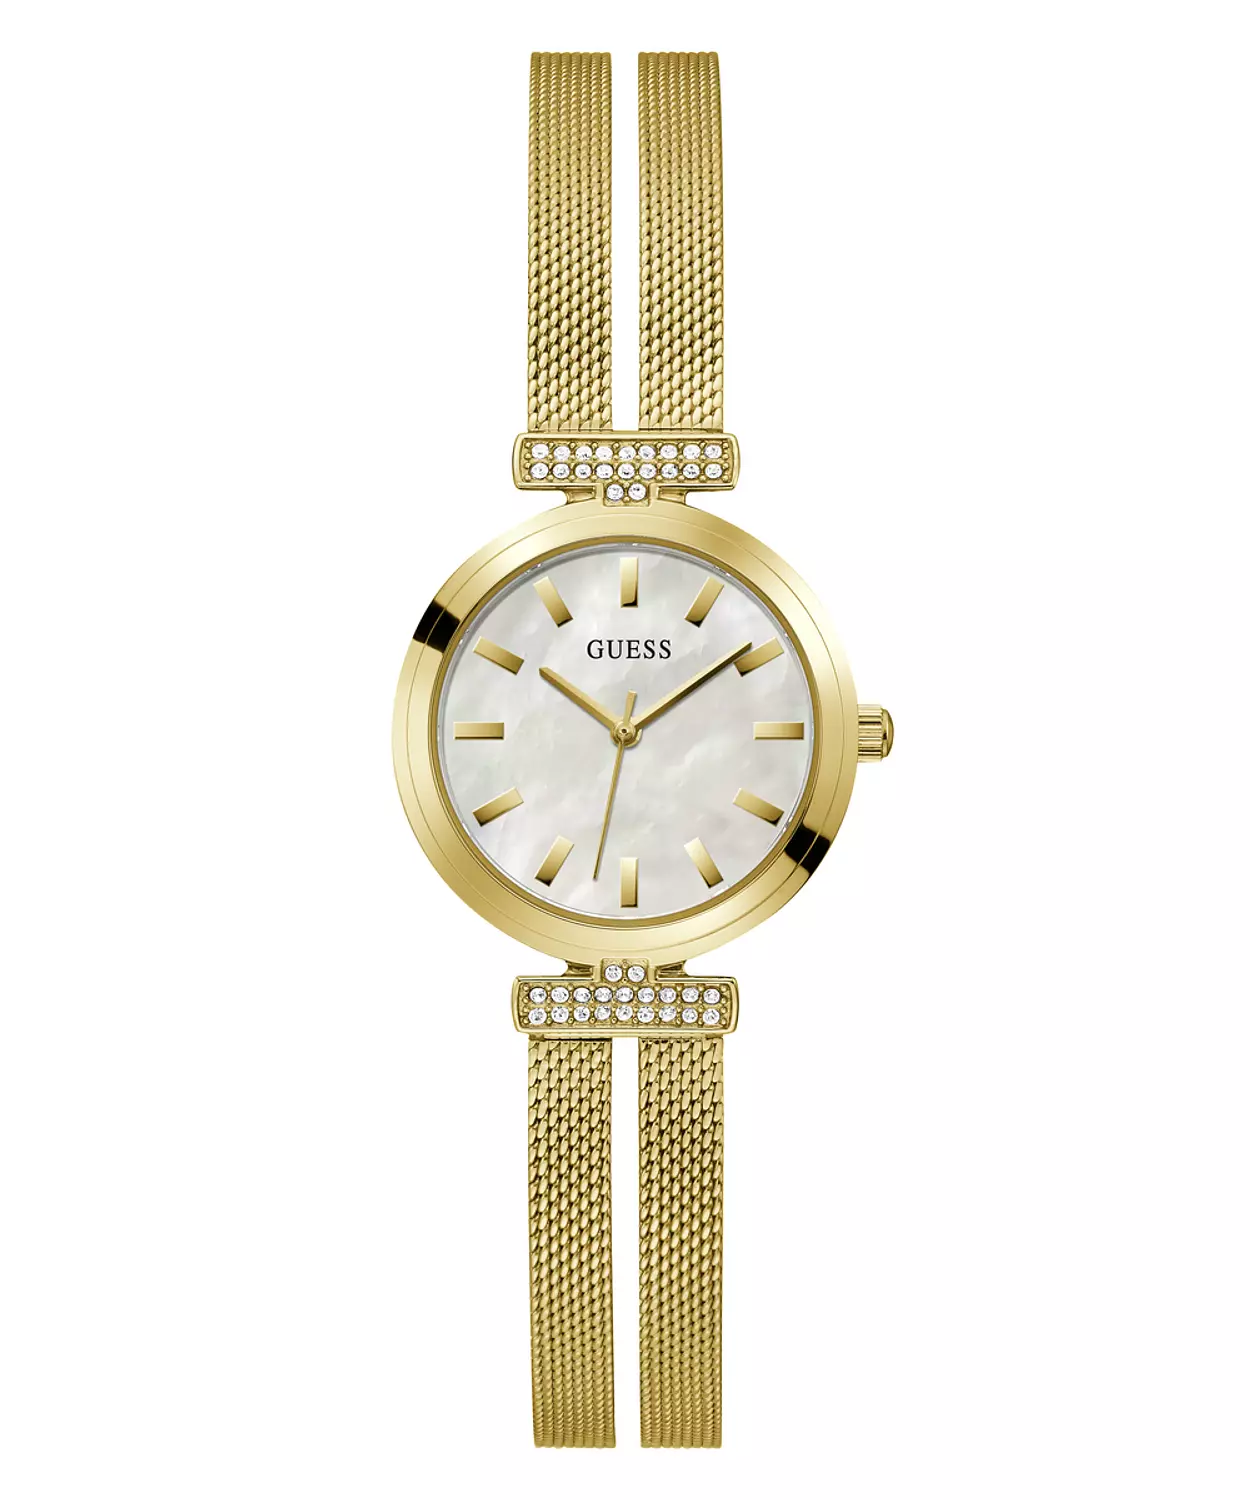 GUESS GW0471L2 ANALOG WATCH For Women Round Shape Gold Stainless Steel/Mesh Polished Bracelet 0